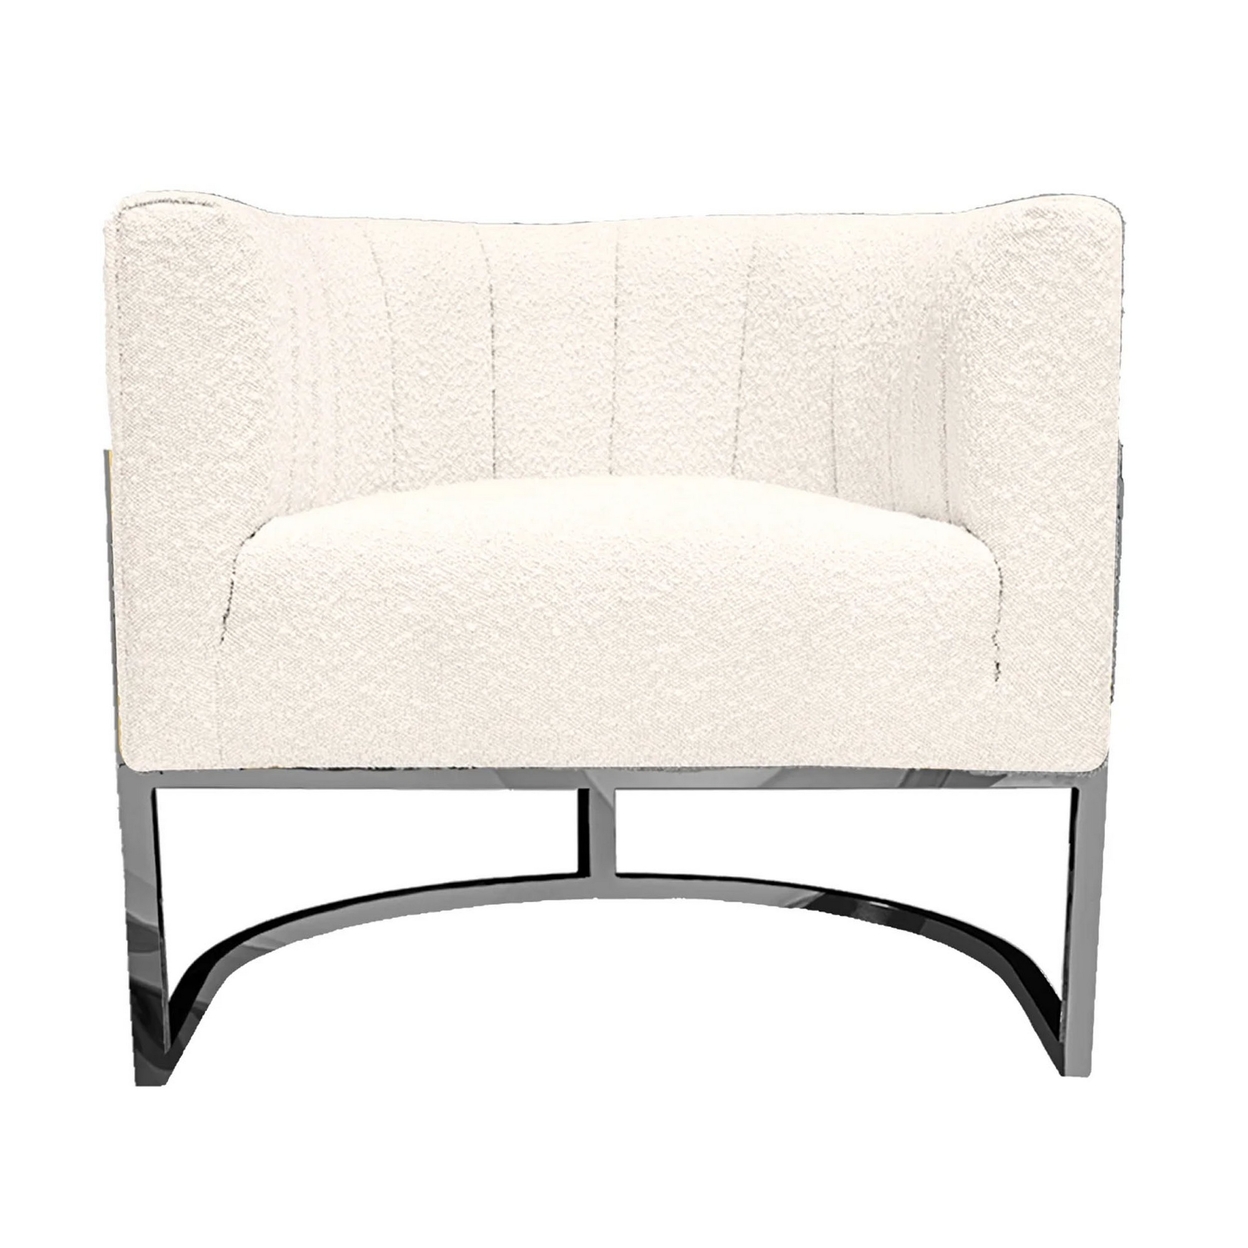 Xin 30 Inch Cantilever Accent Chair, Crisp White Boucle Upholstery, Chrome- Saltoro Sherpi